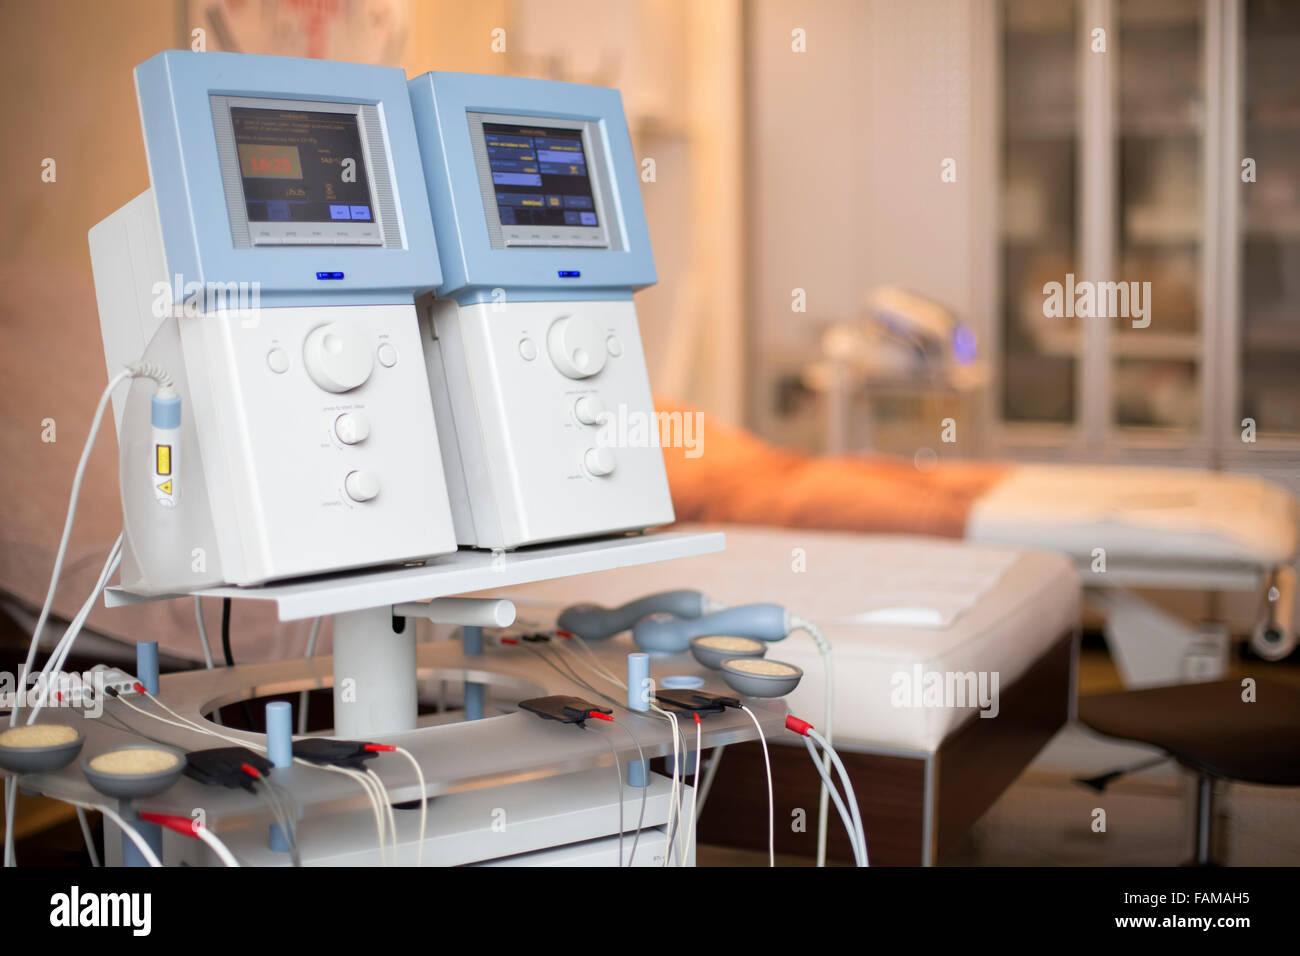 Ultrasound device, medical and diagnostic tool Stock Photo